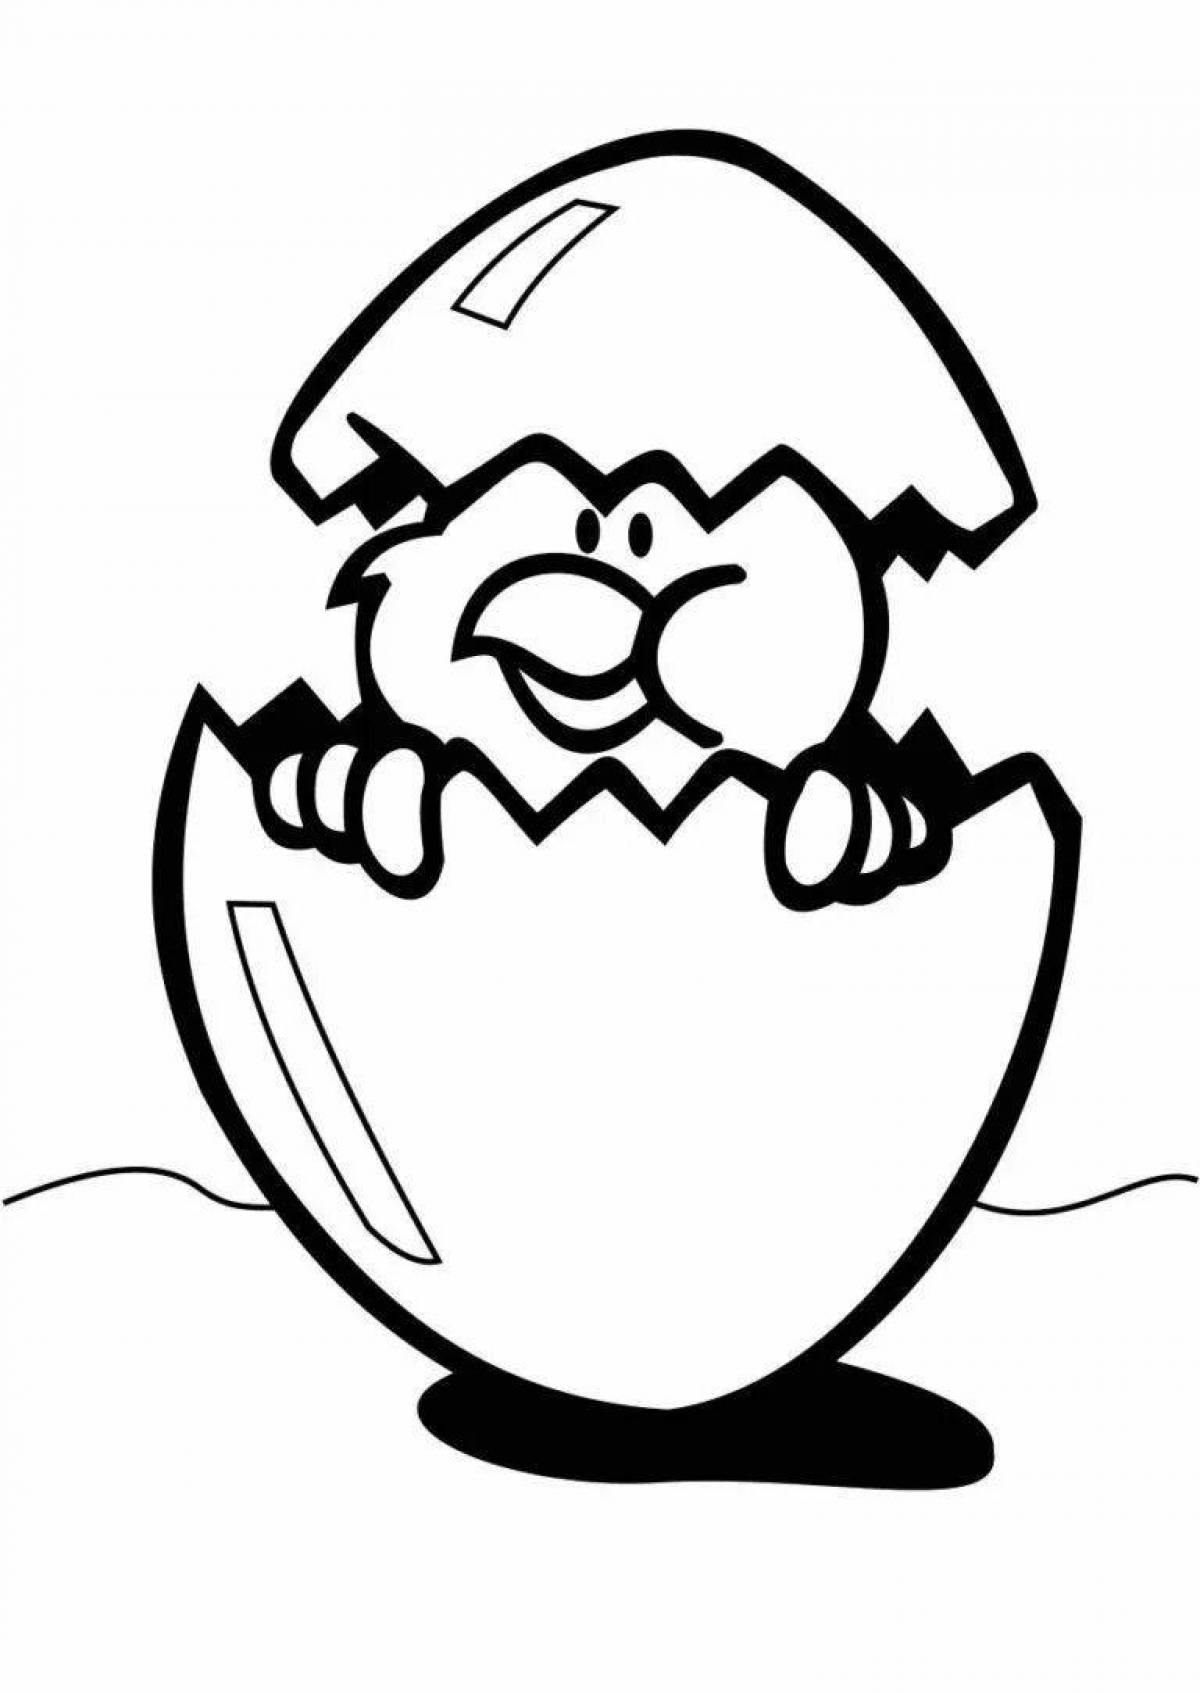 Coloring page adorable chicken in egg